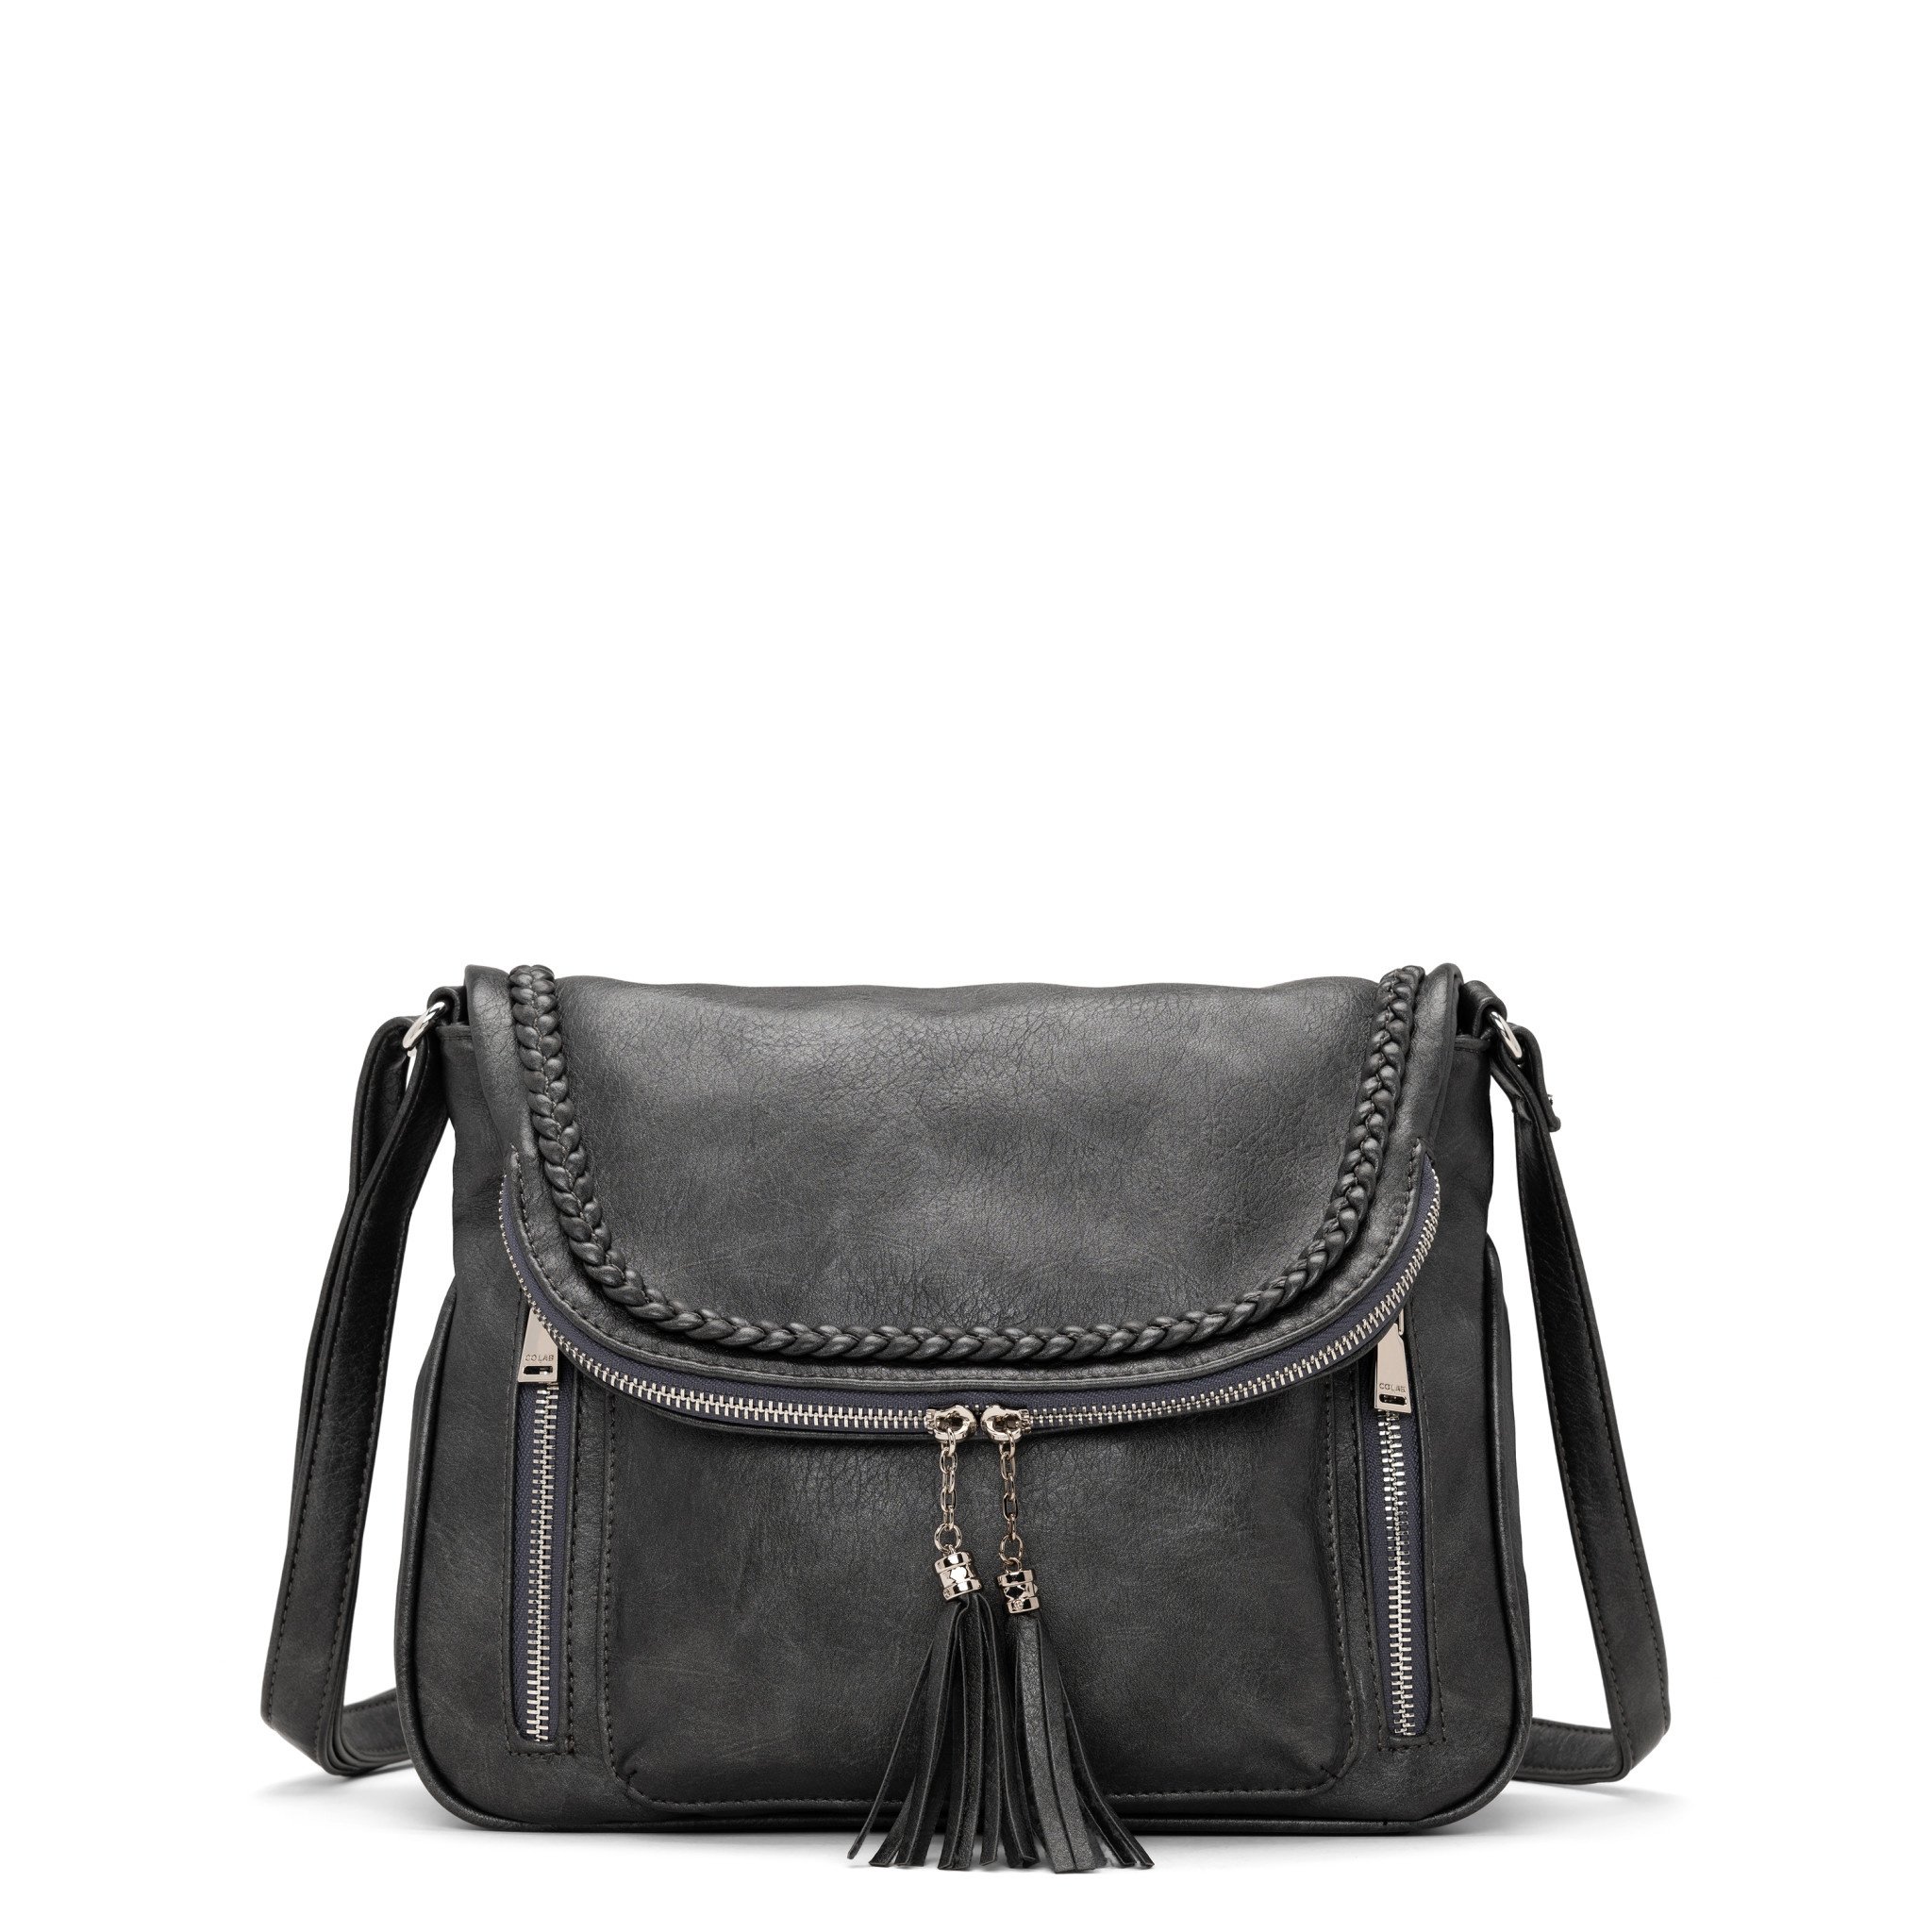 Colab Colab Missy - Messenger (#6660) - Charcoal